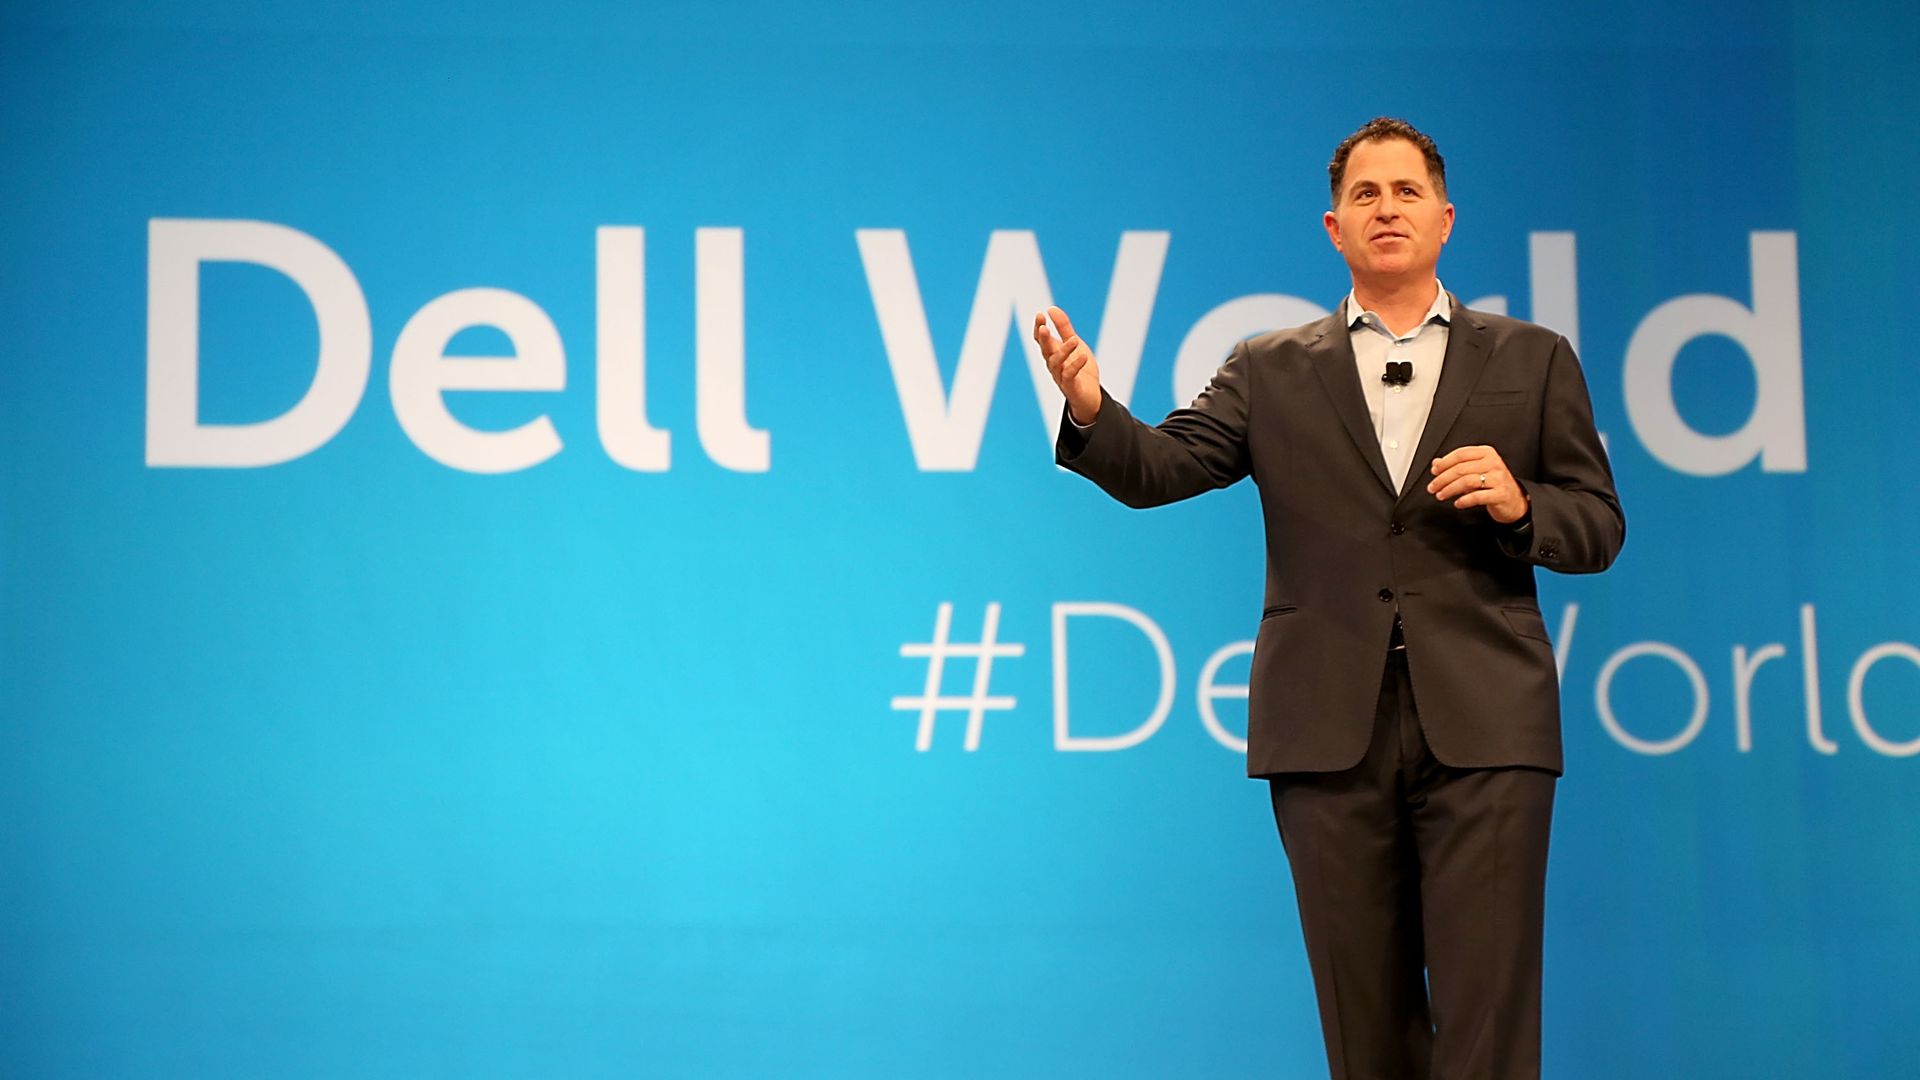 Michael Dell speaking at a company conference.